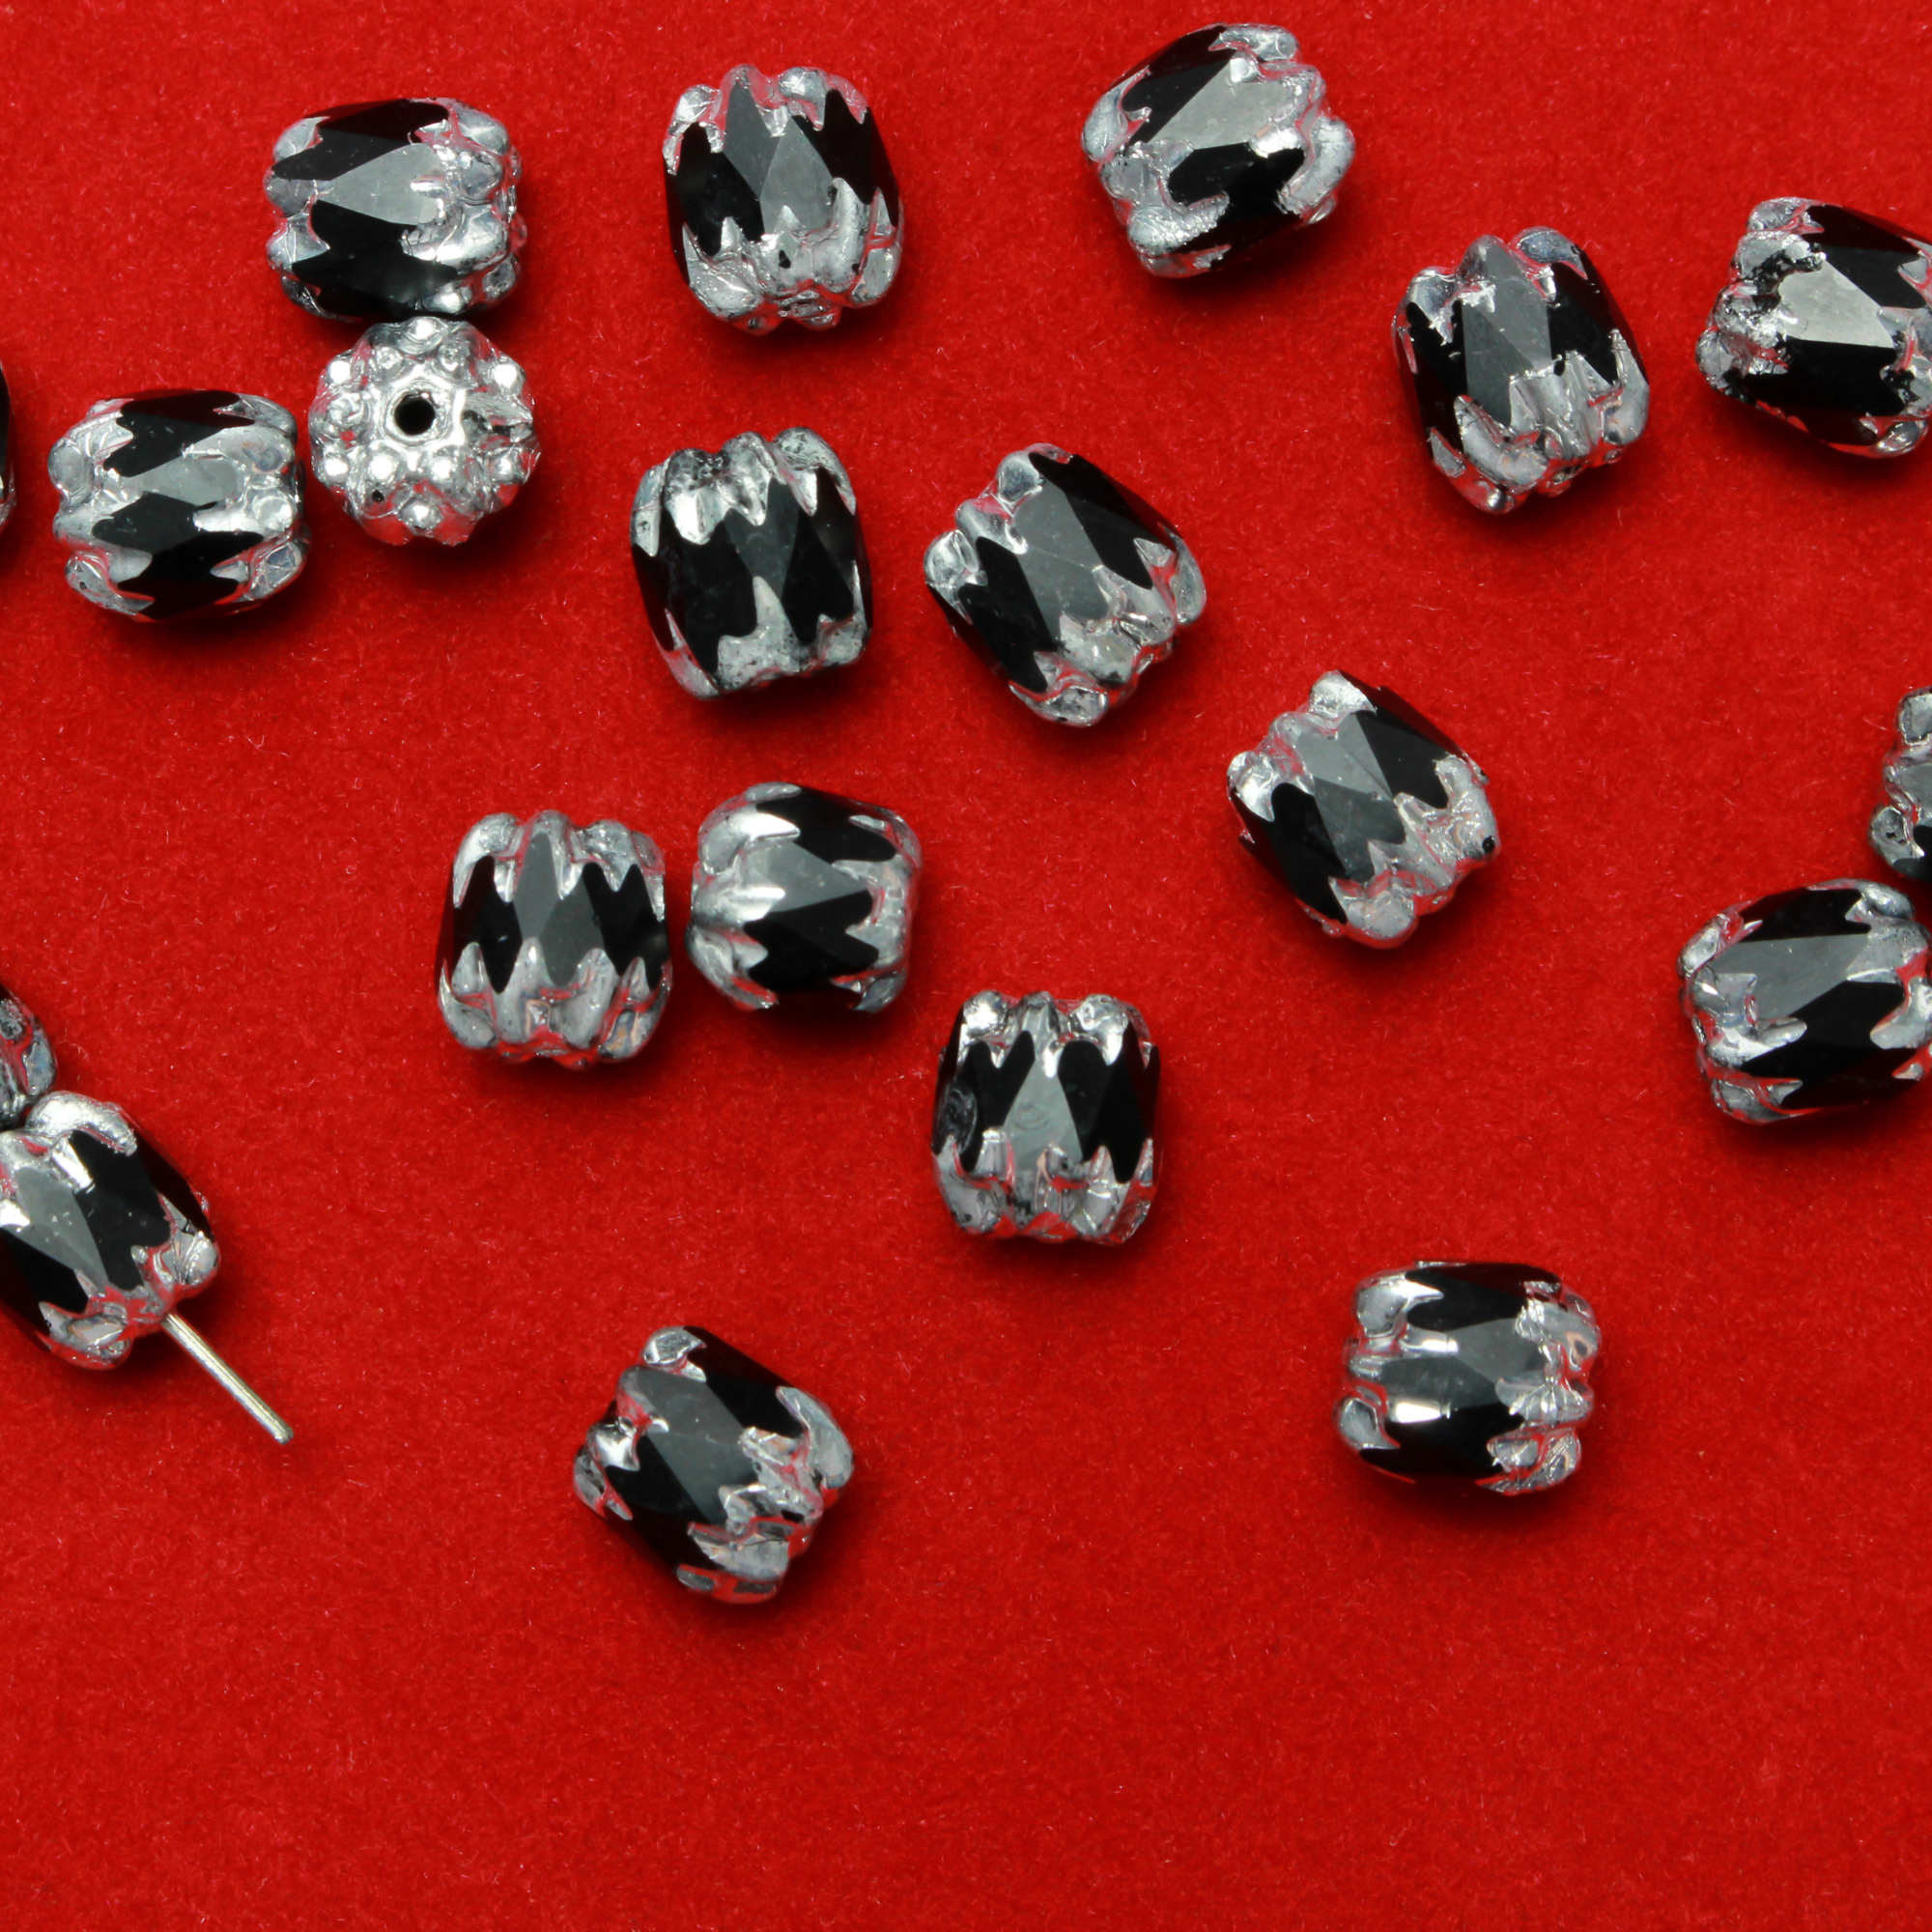 Cathedral shape beads that are faceted. The top and the bottom of the bead are a patterned glass with a silver coating. Made in the Czech Republic. Sold in sets of 20 beads